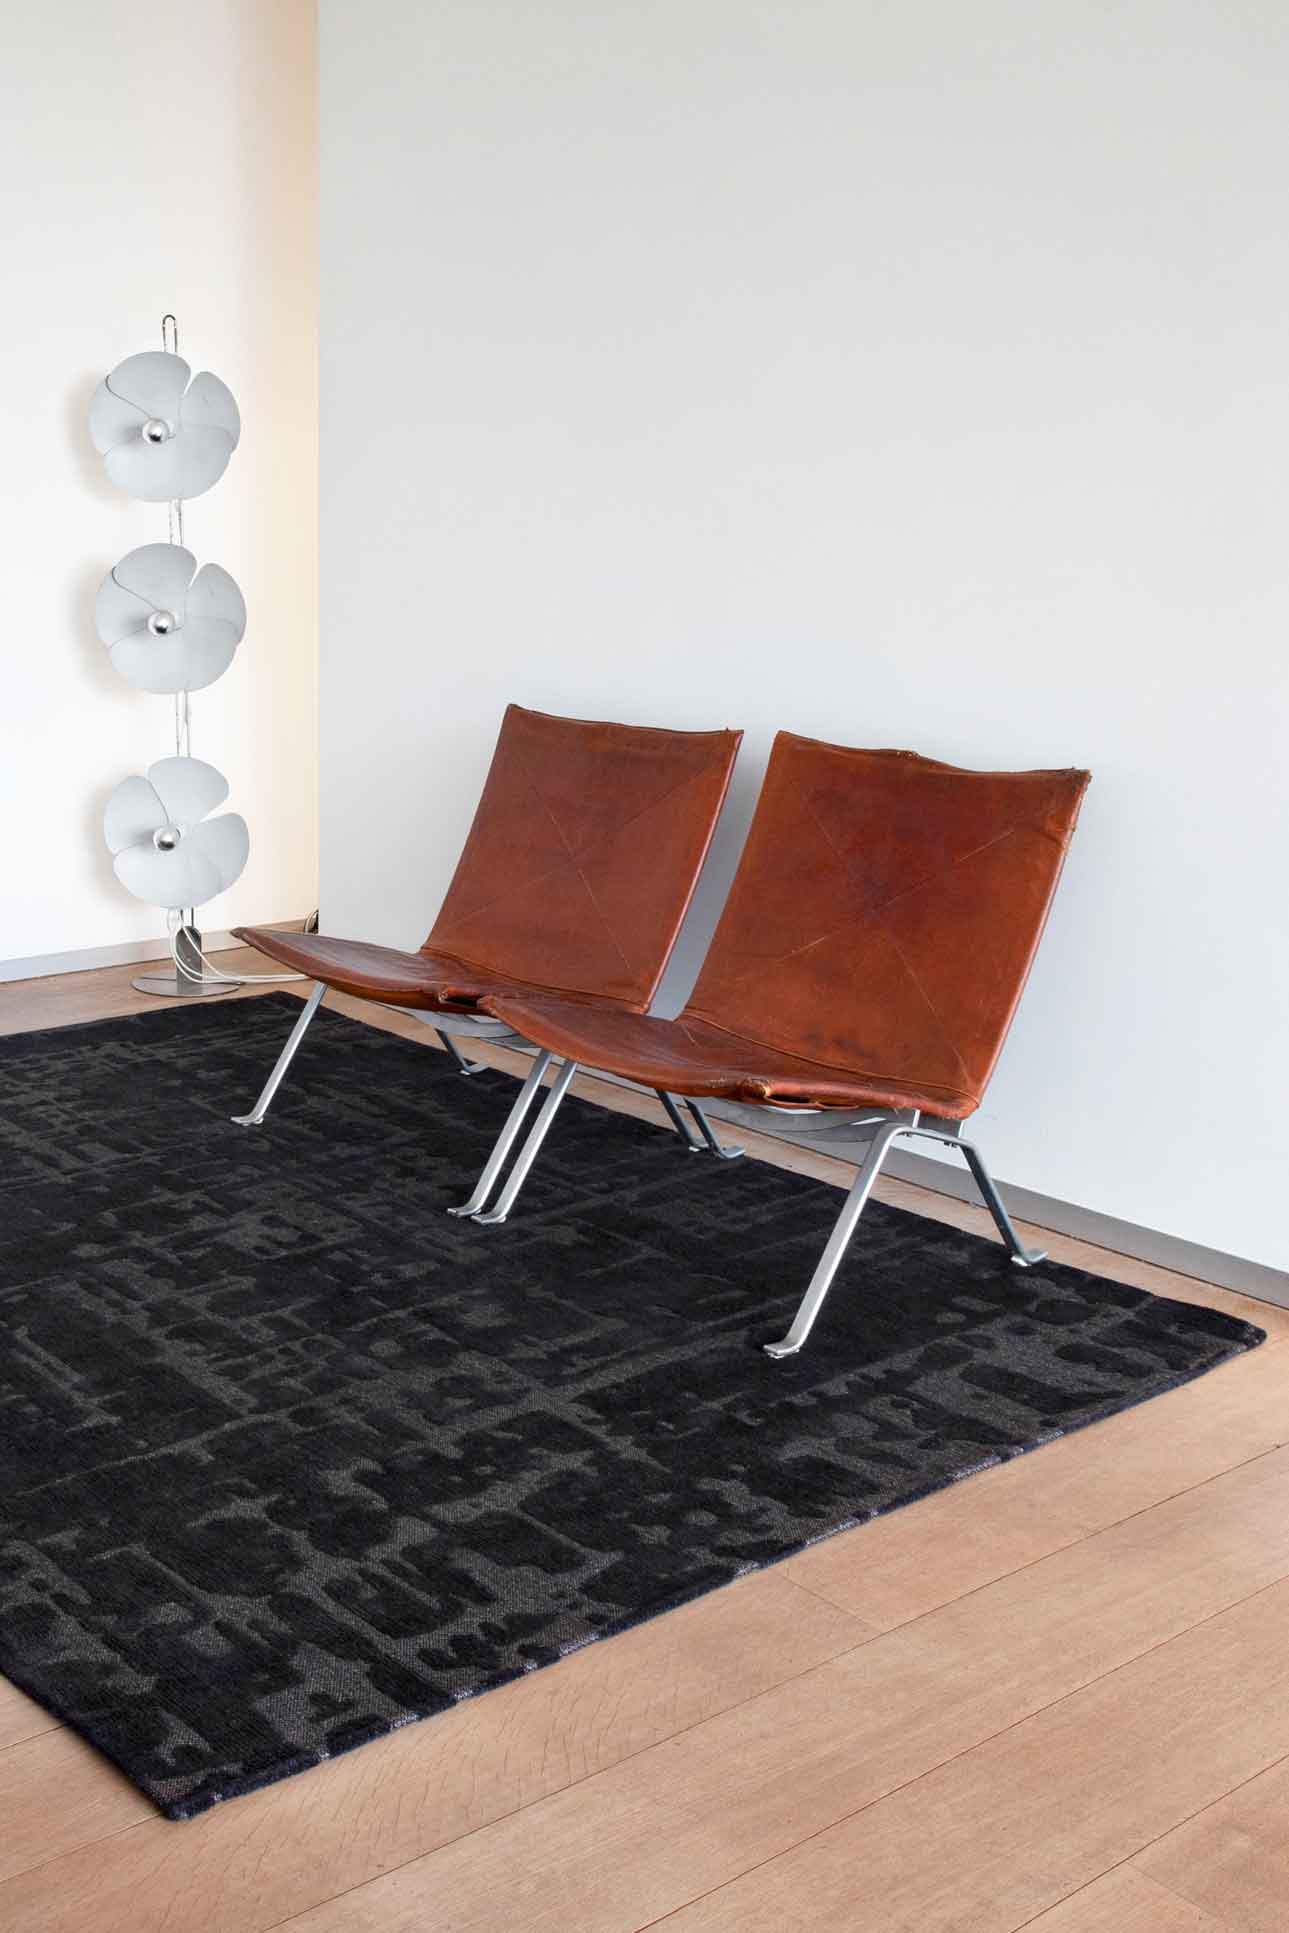 Abstract Black Belgian Rug ☞ Size: 2' 7" x 5' (80 x 150 cm)